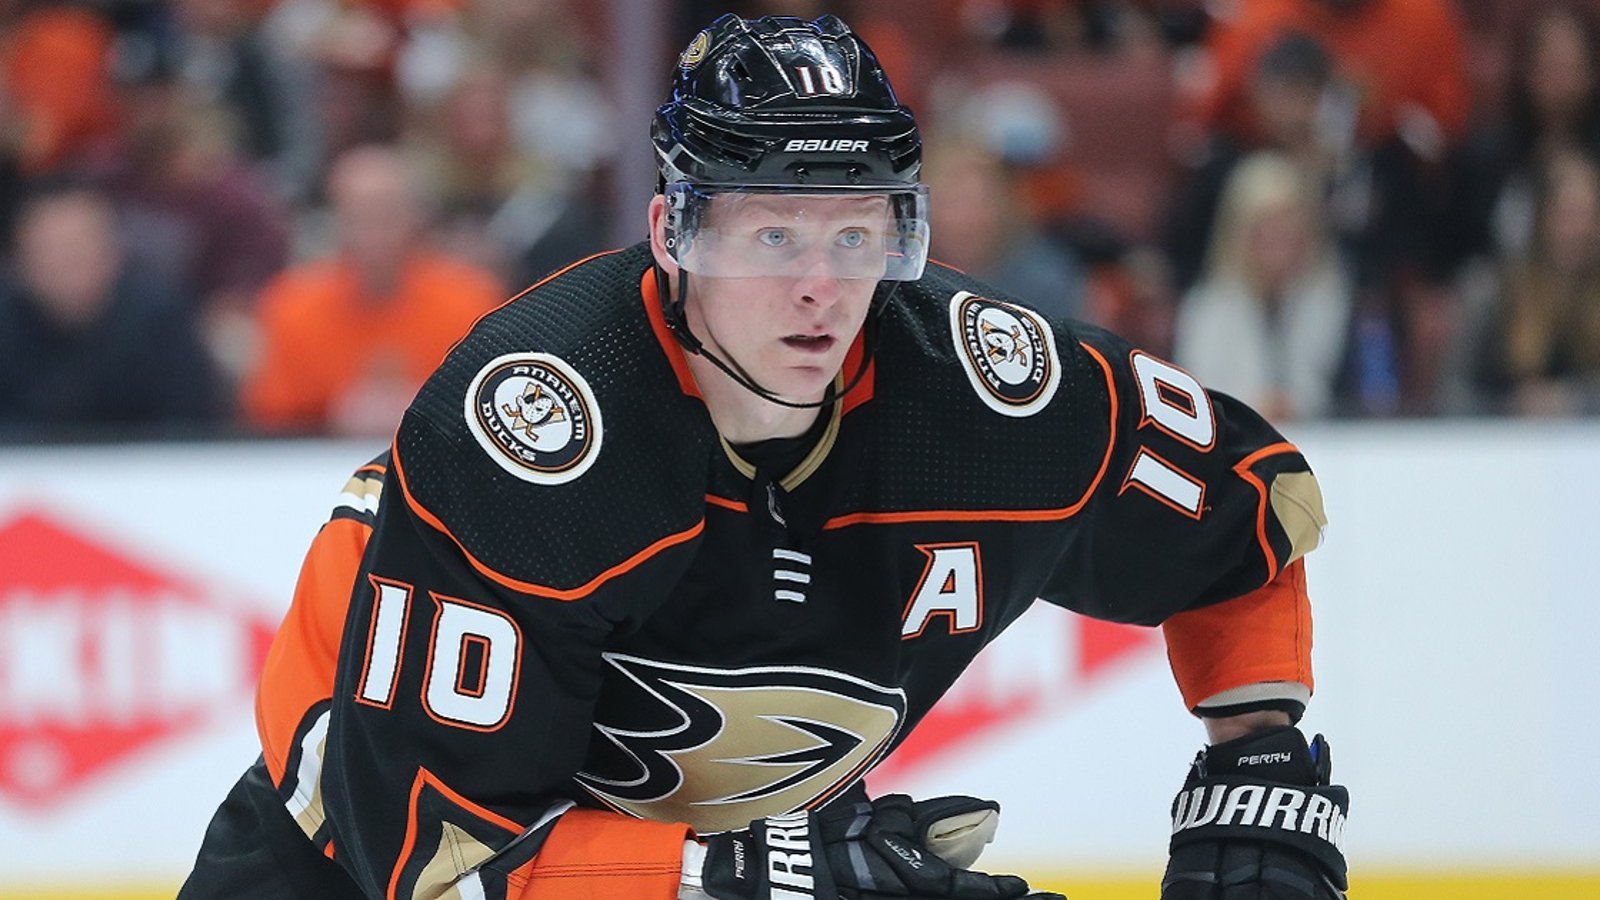 Rumor: Corey Perry is done in Anaheim. 